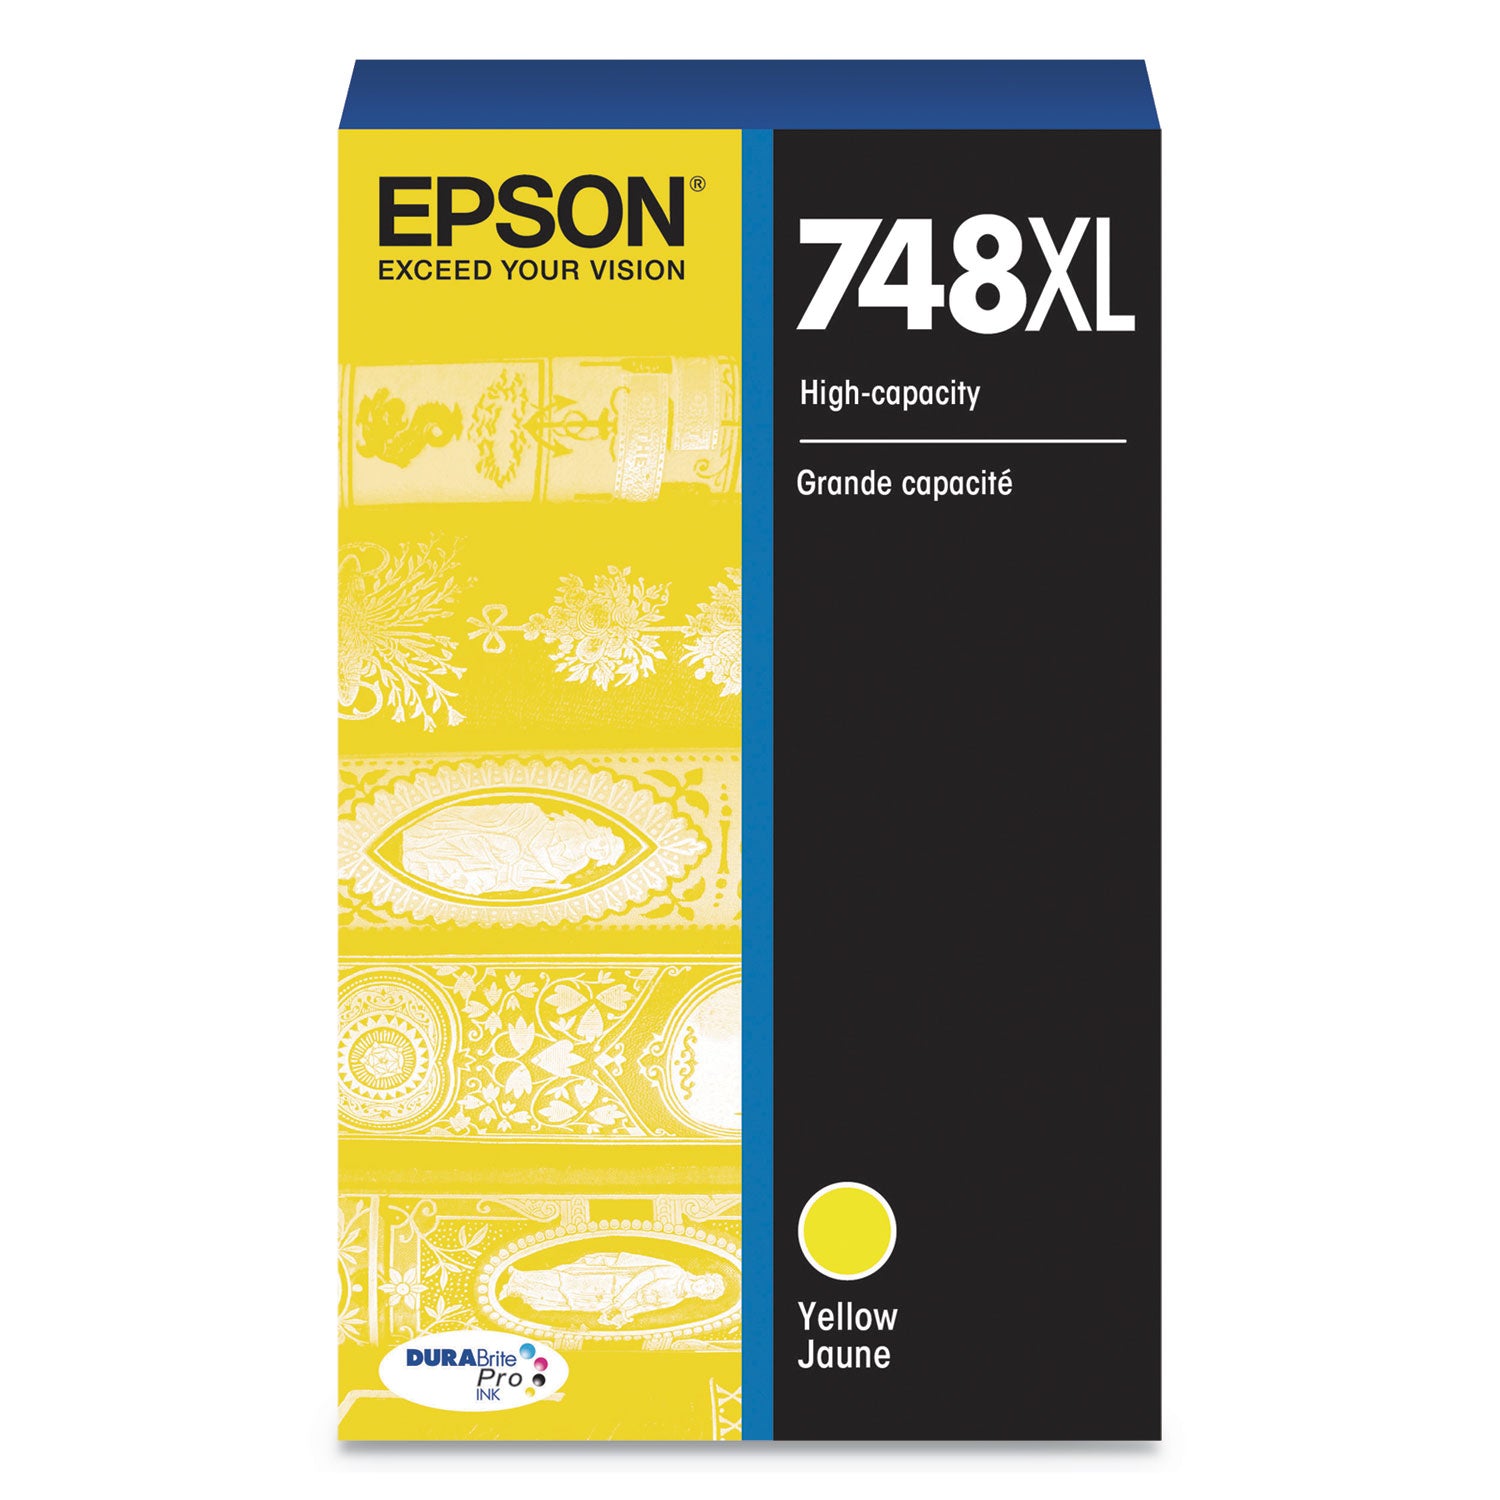 t748xl420-748xl-durabrite-pro-high-yield-ink-4000-page-yield-yellow_epst748xl420 - 1